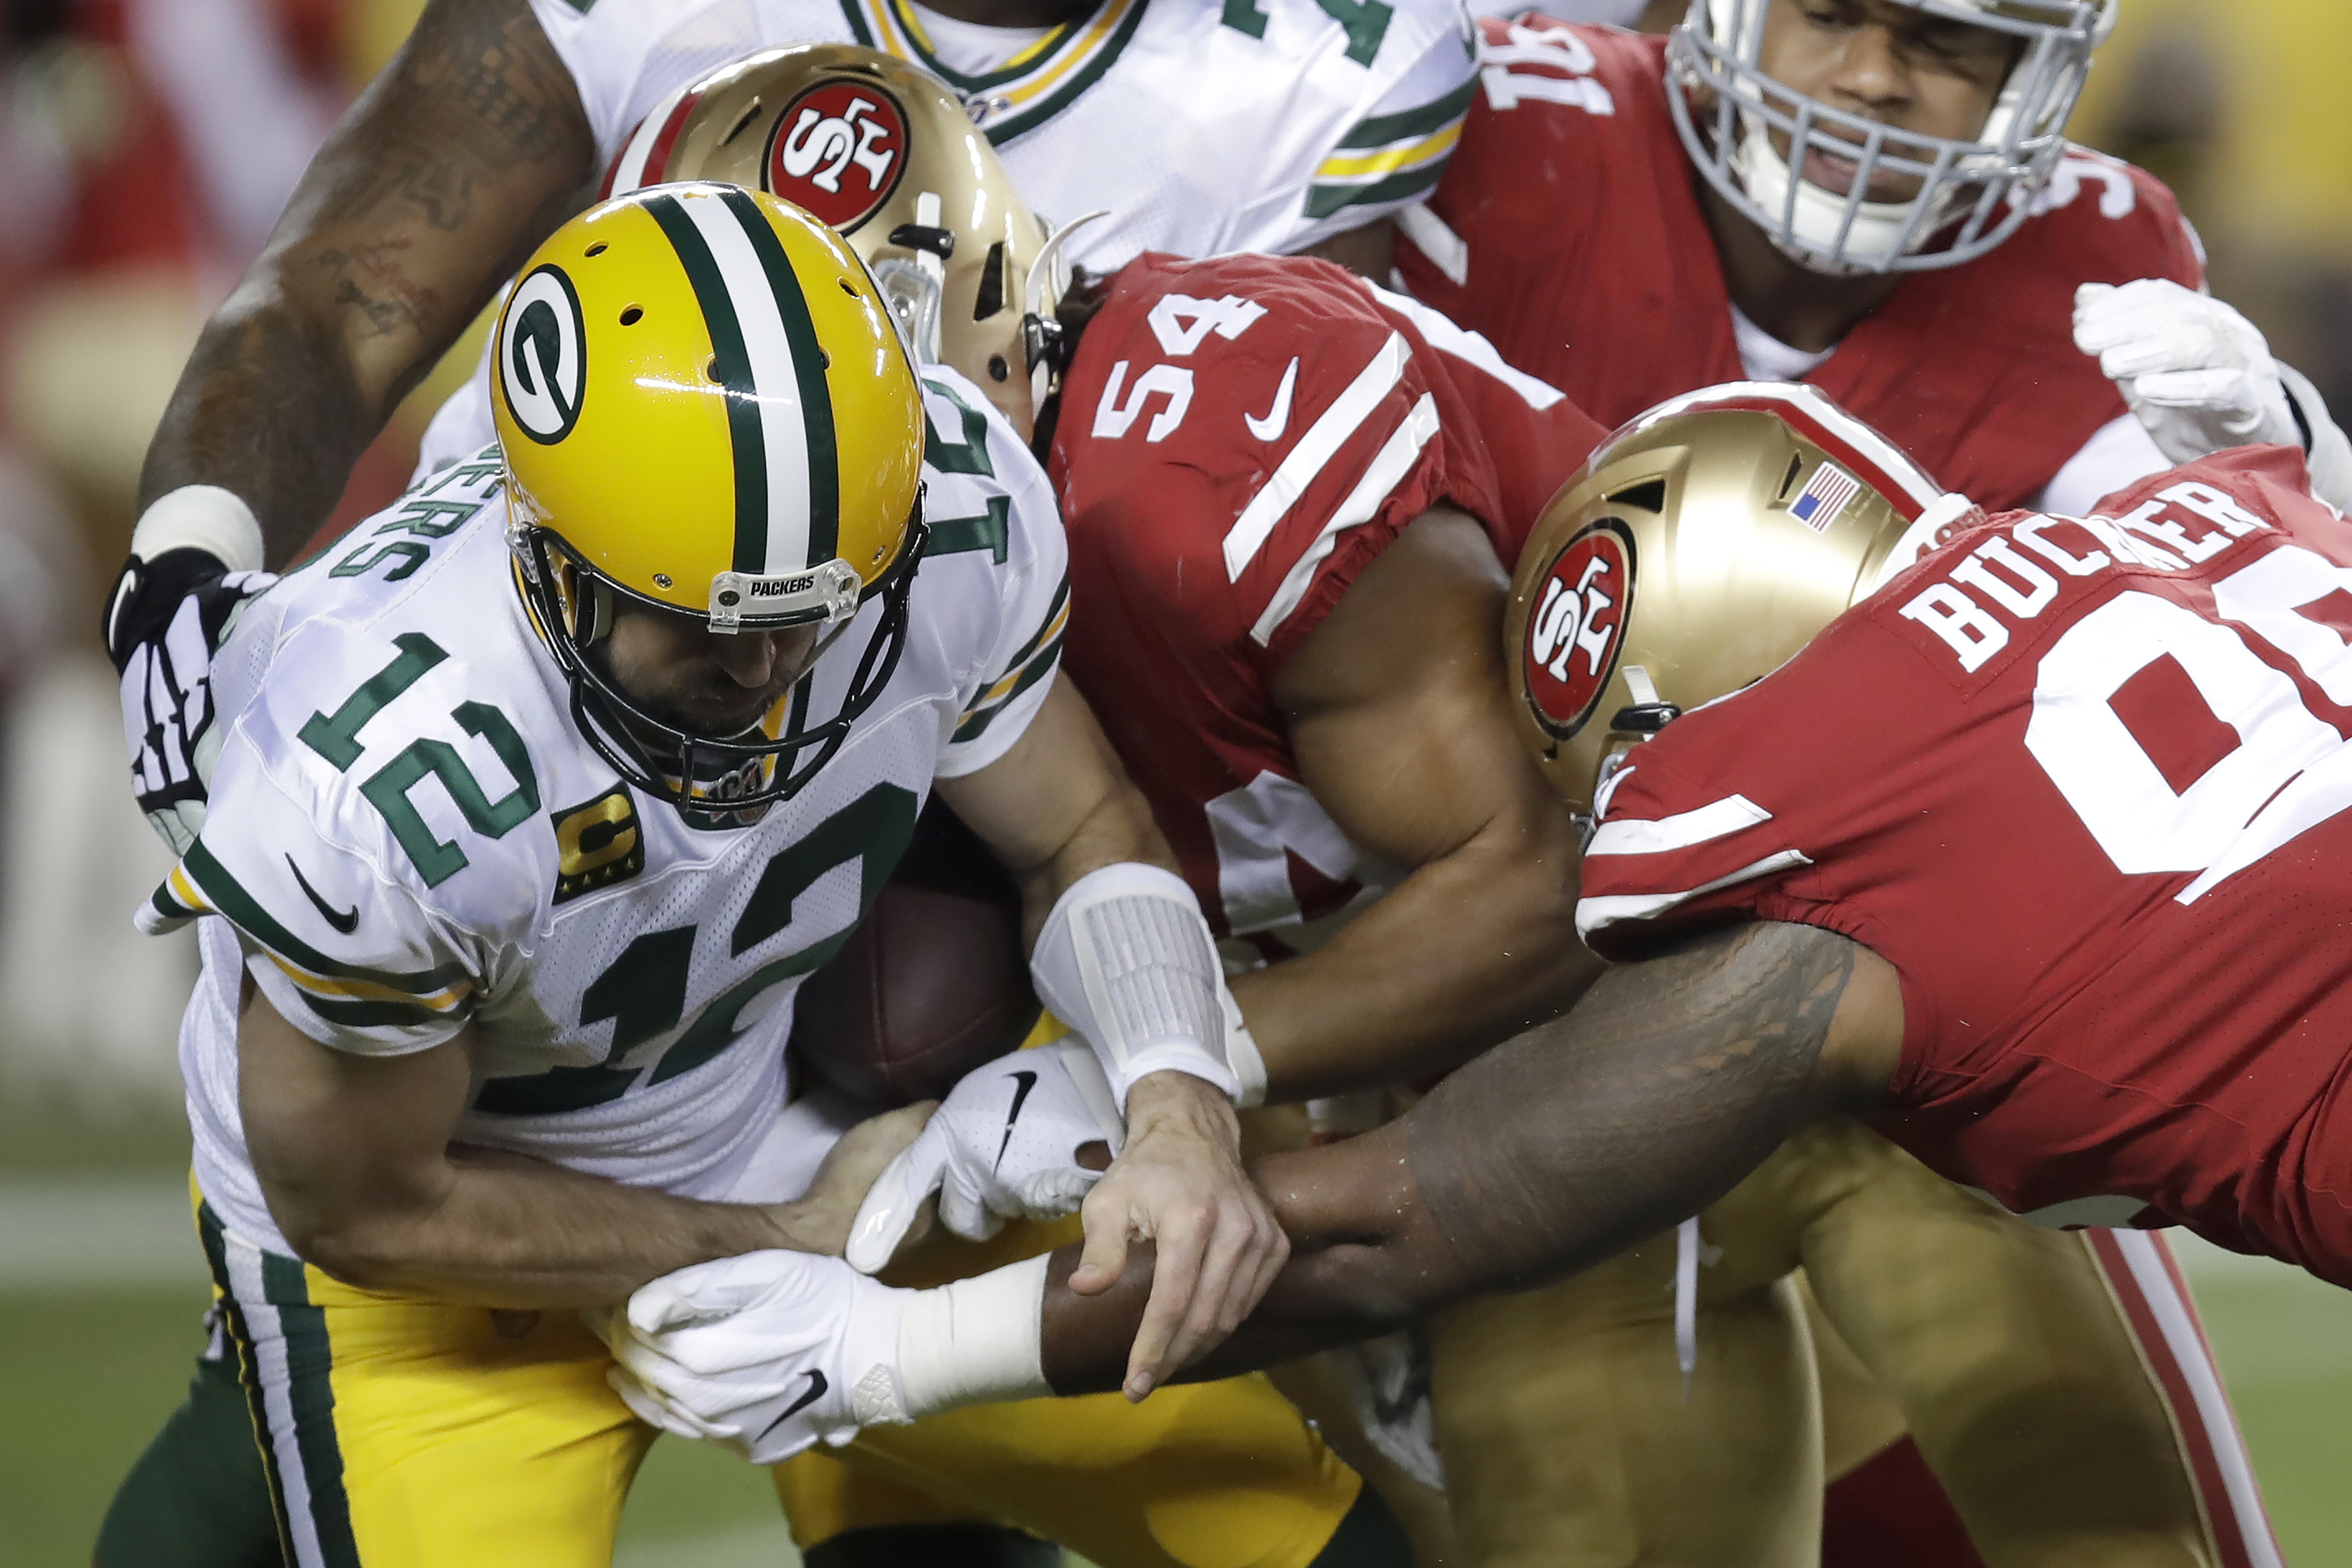 Aaron Rodgers gets sacked during the Packers 37-20 loss to the 49ers in the 2019 NFC Championship Game.